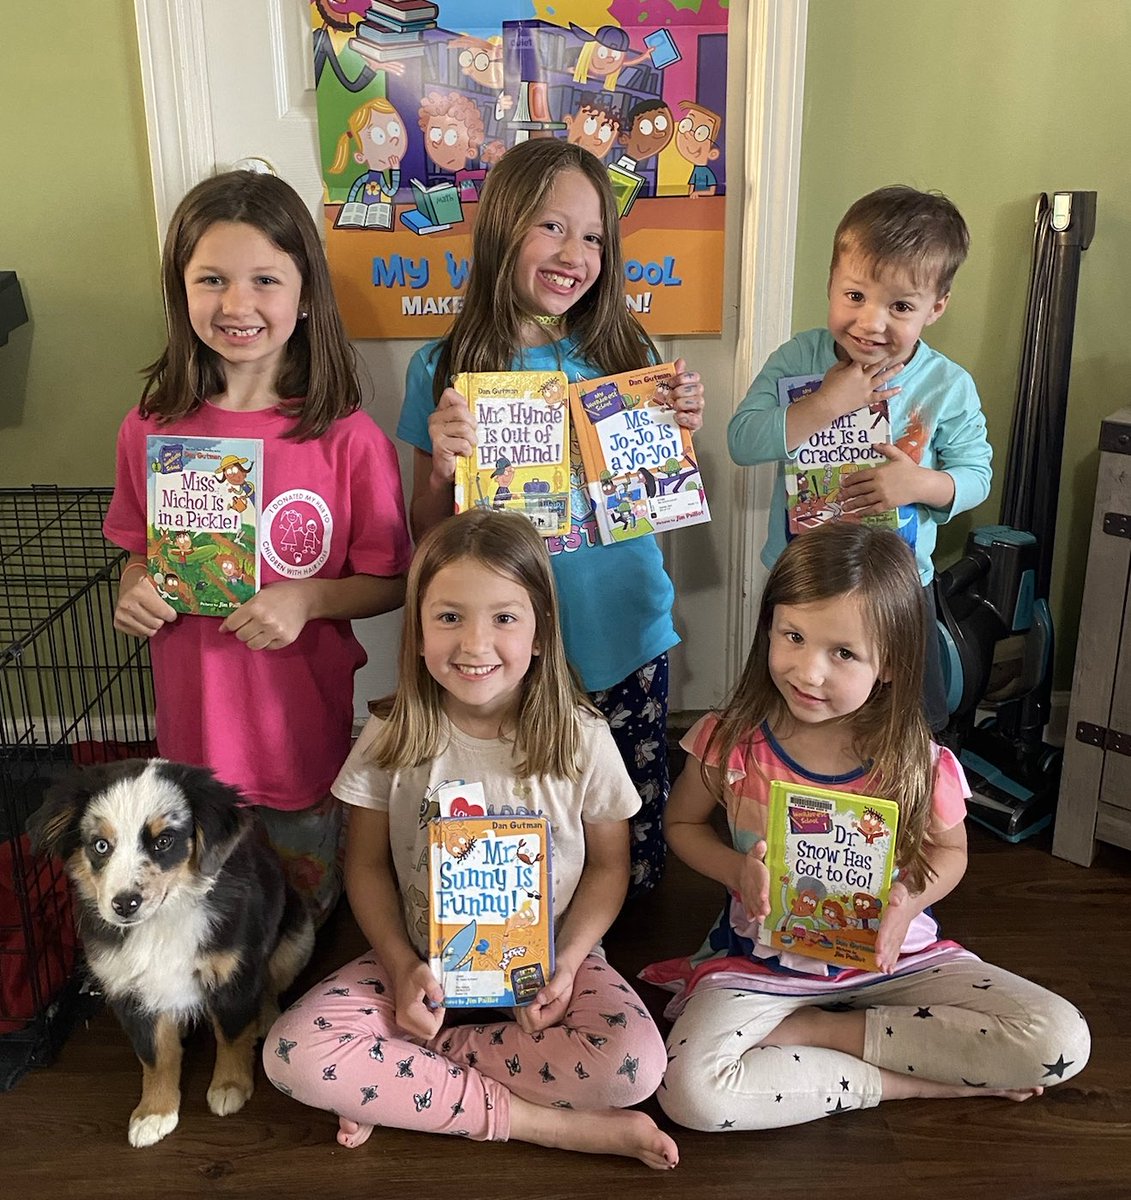 SPEEDREADERS OF THE DAY are Keira, Ellie, Harper, Lennon, and Tucker who live in Kentucky and are working their way through all 100 My Weird School books. Oh, and don’t forget their dog Arlo, who they named after the main character in the series.